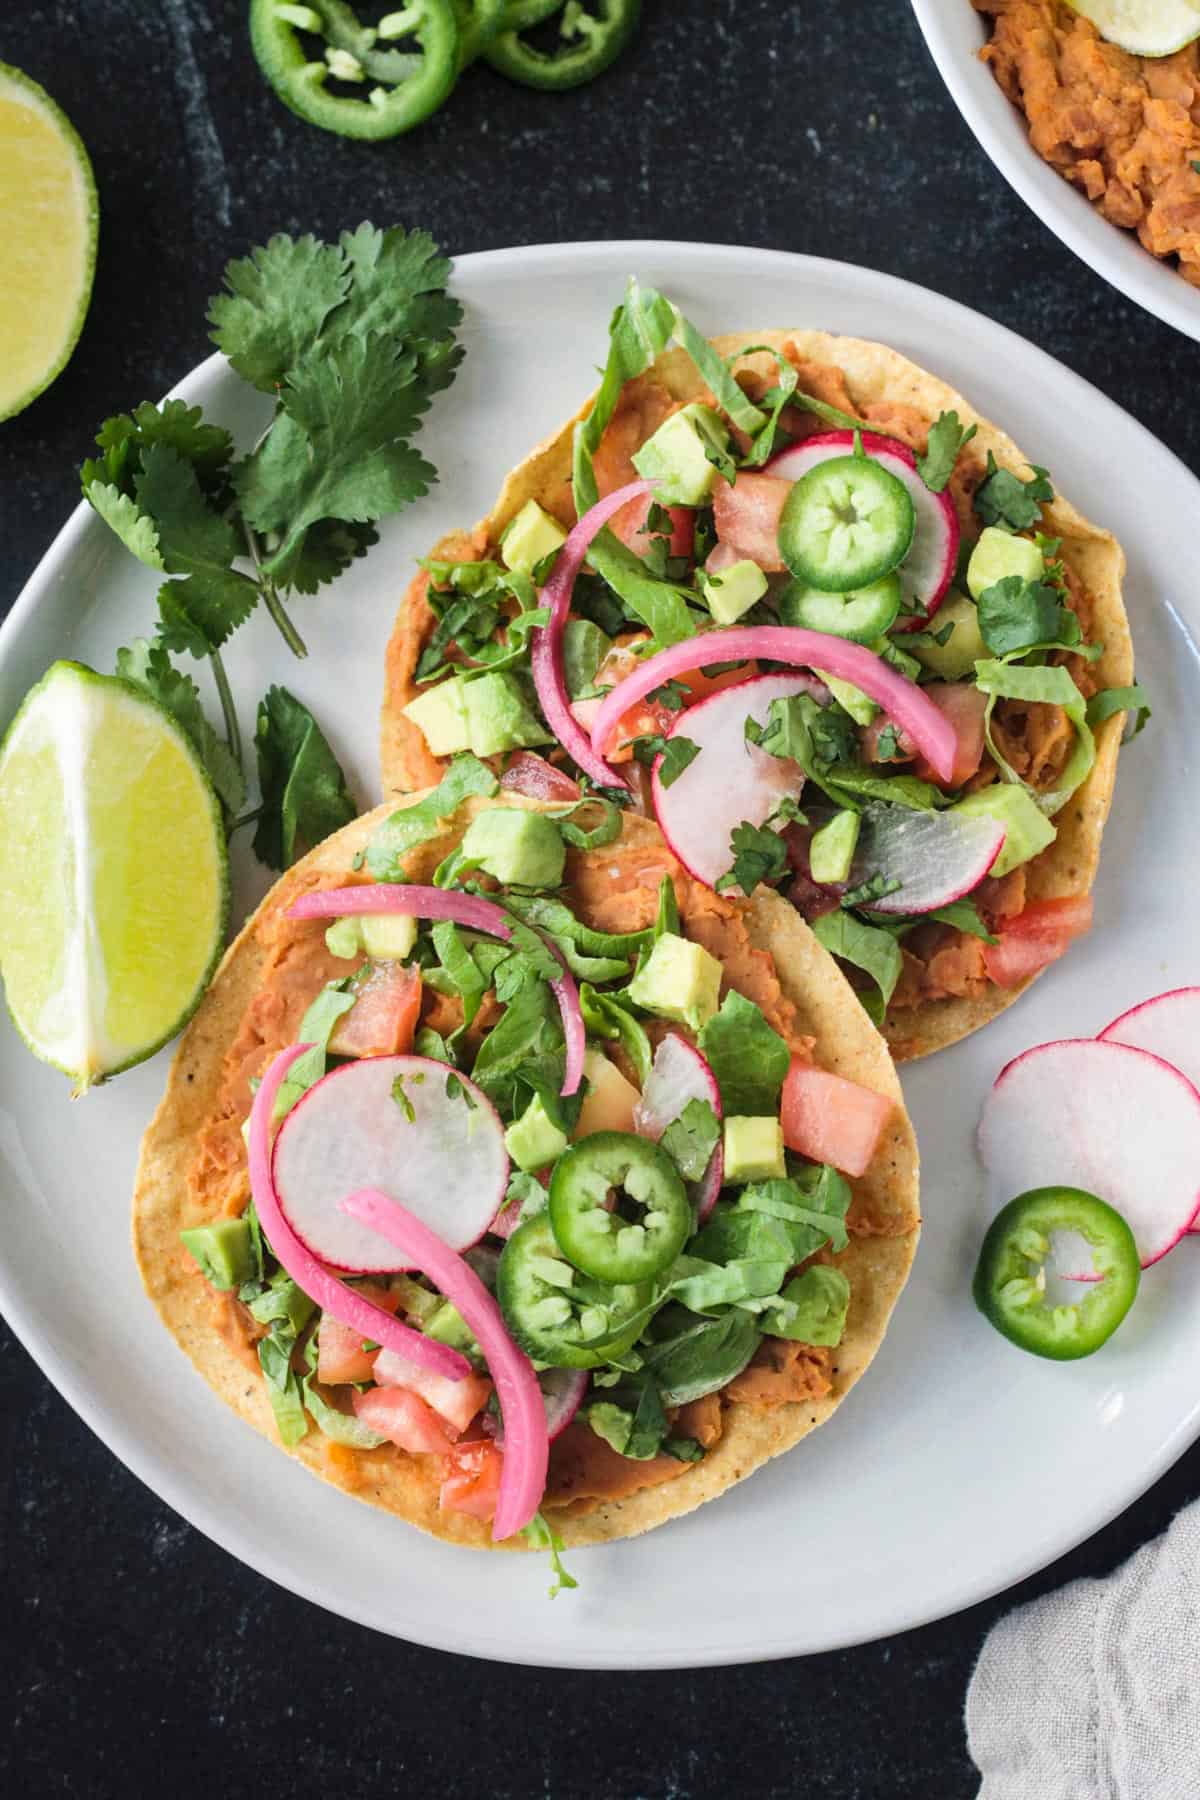 Two crispy baked flat tortillas with lots of toppings next to a lime wedge.